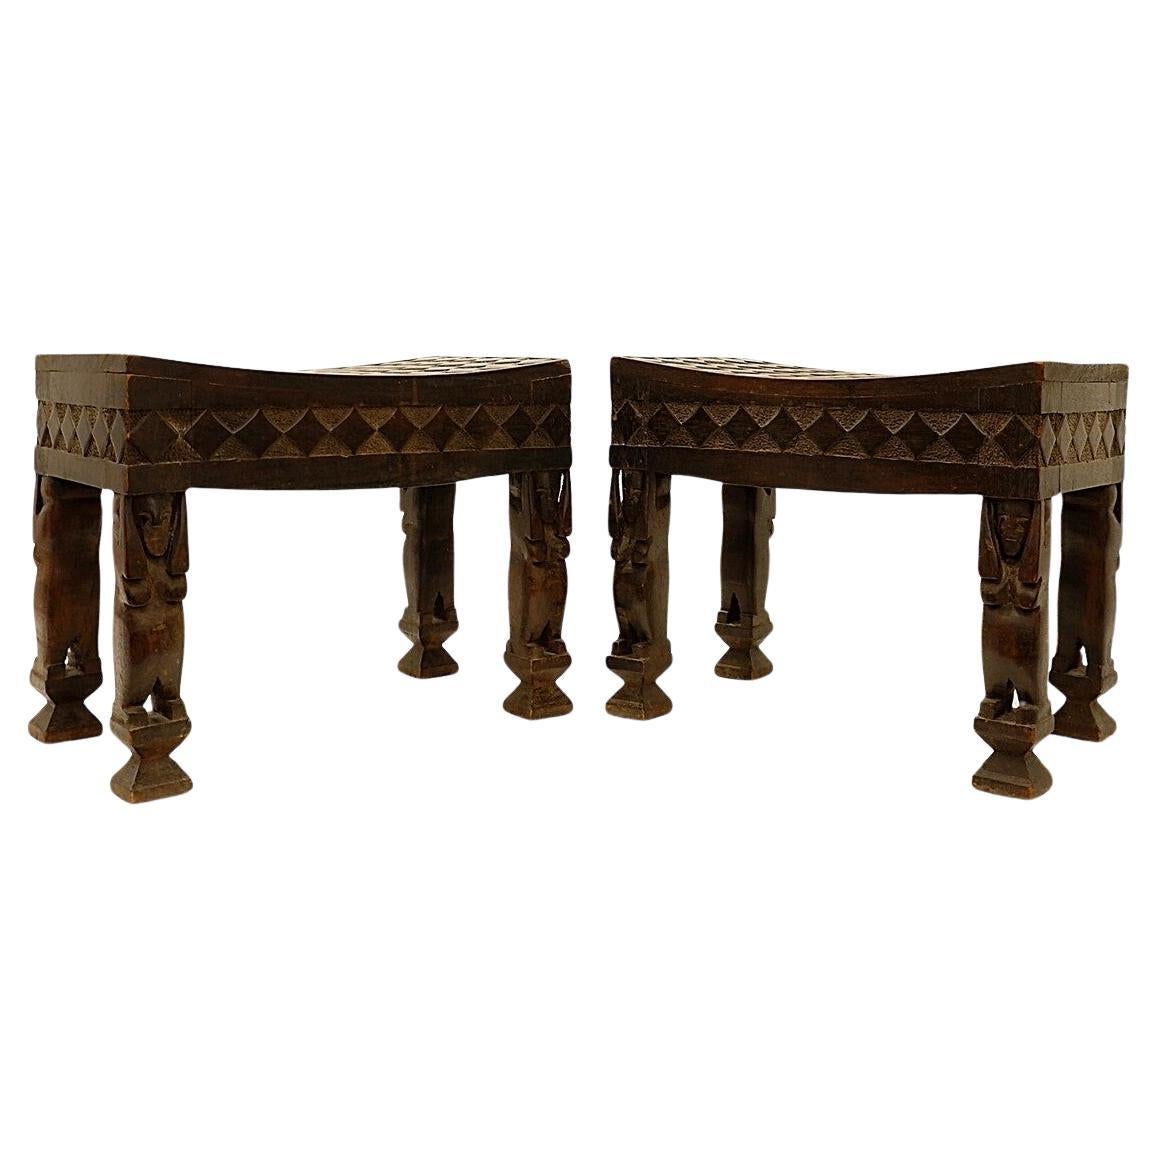 Pair of African carved wood stools